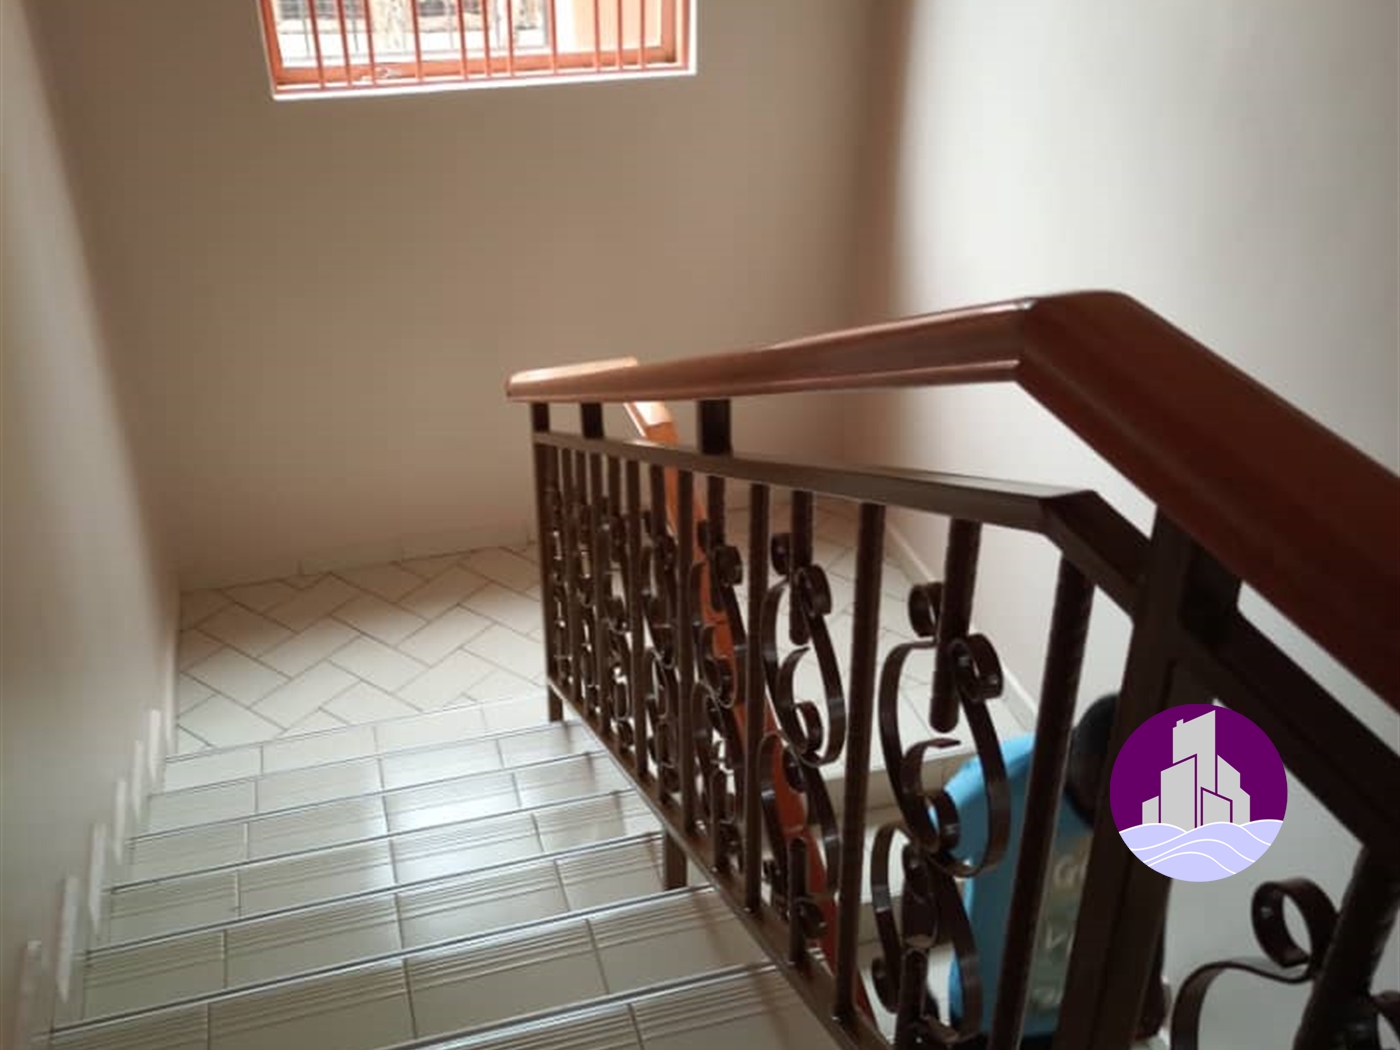 Town House for rent in Lubowa Kampala